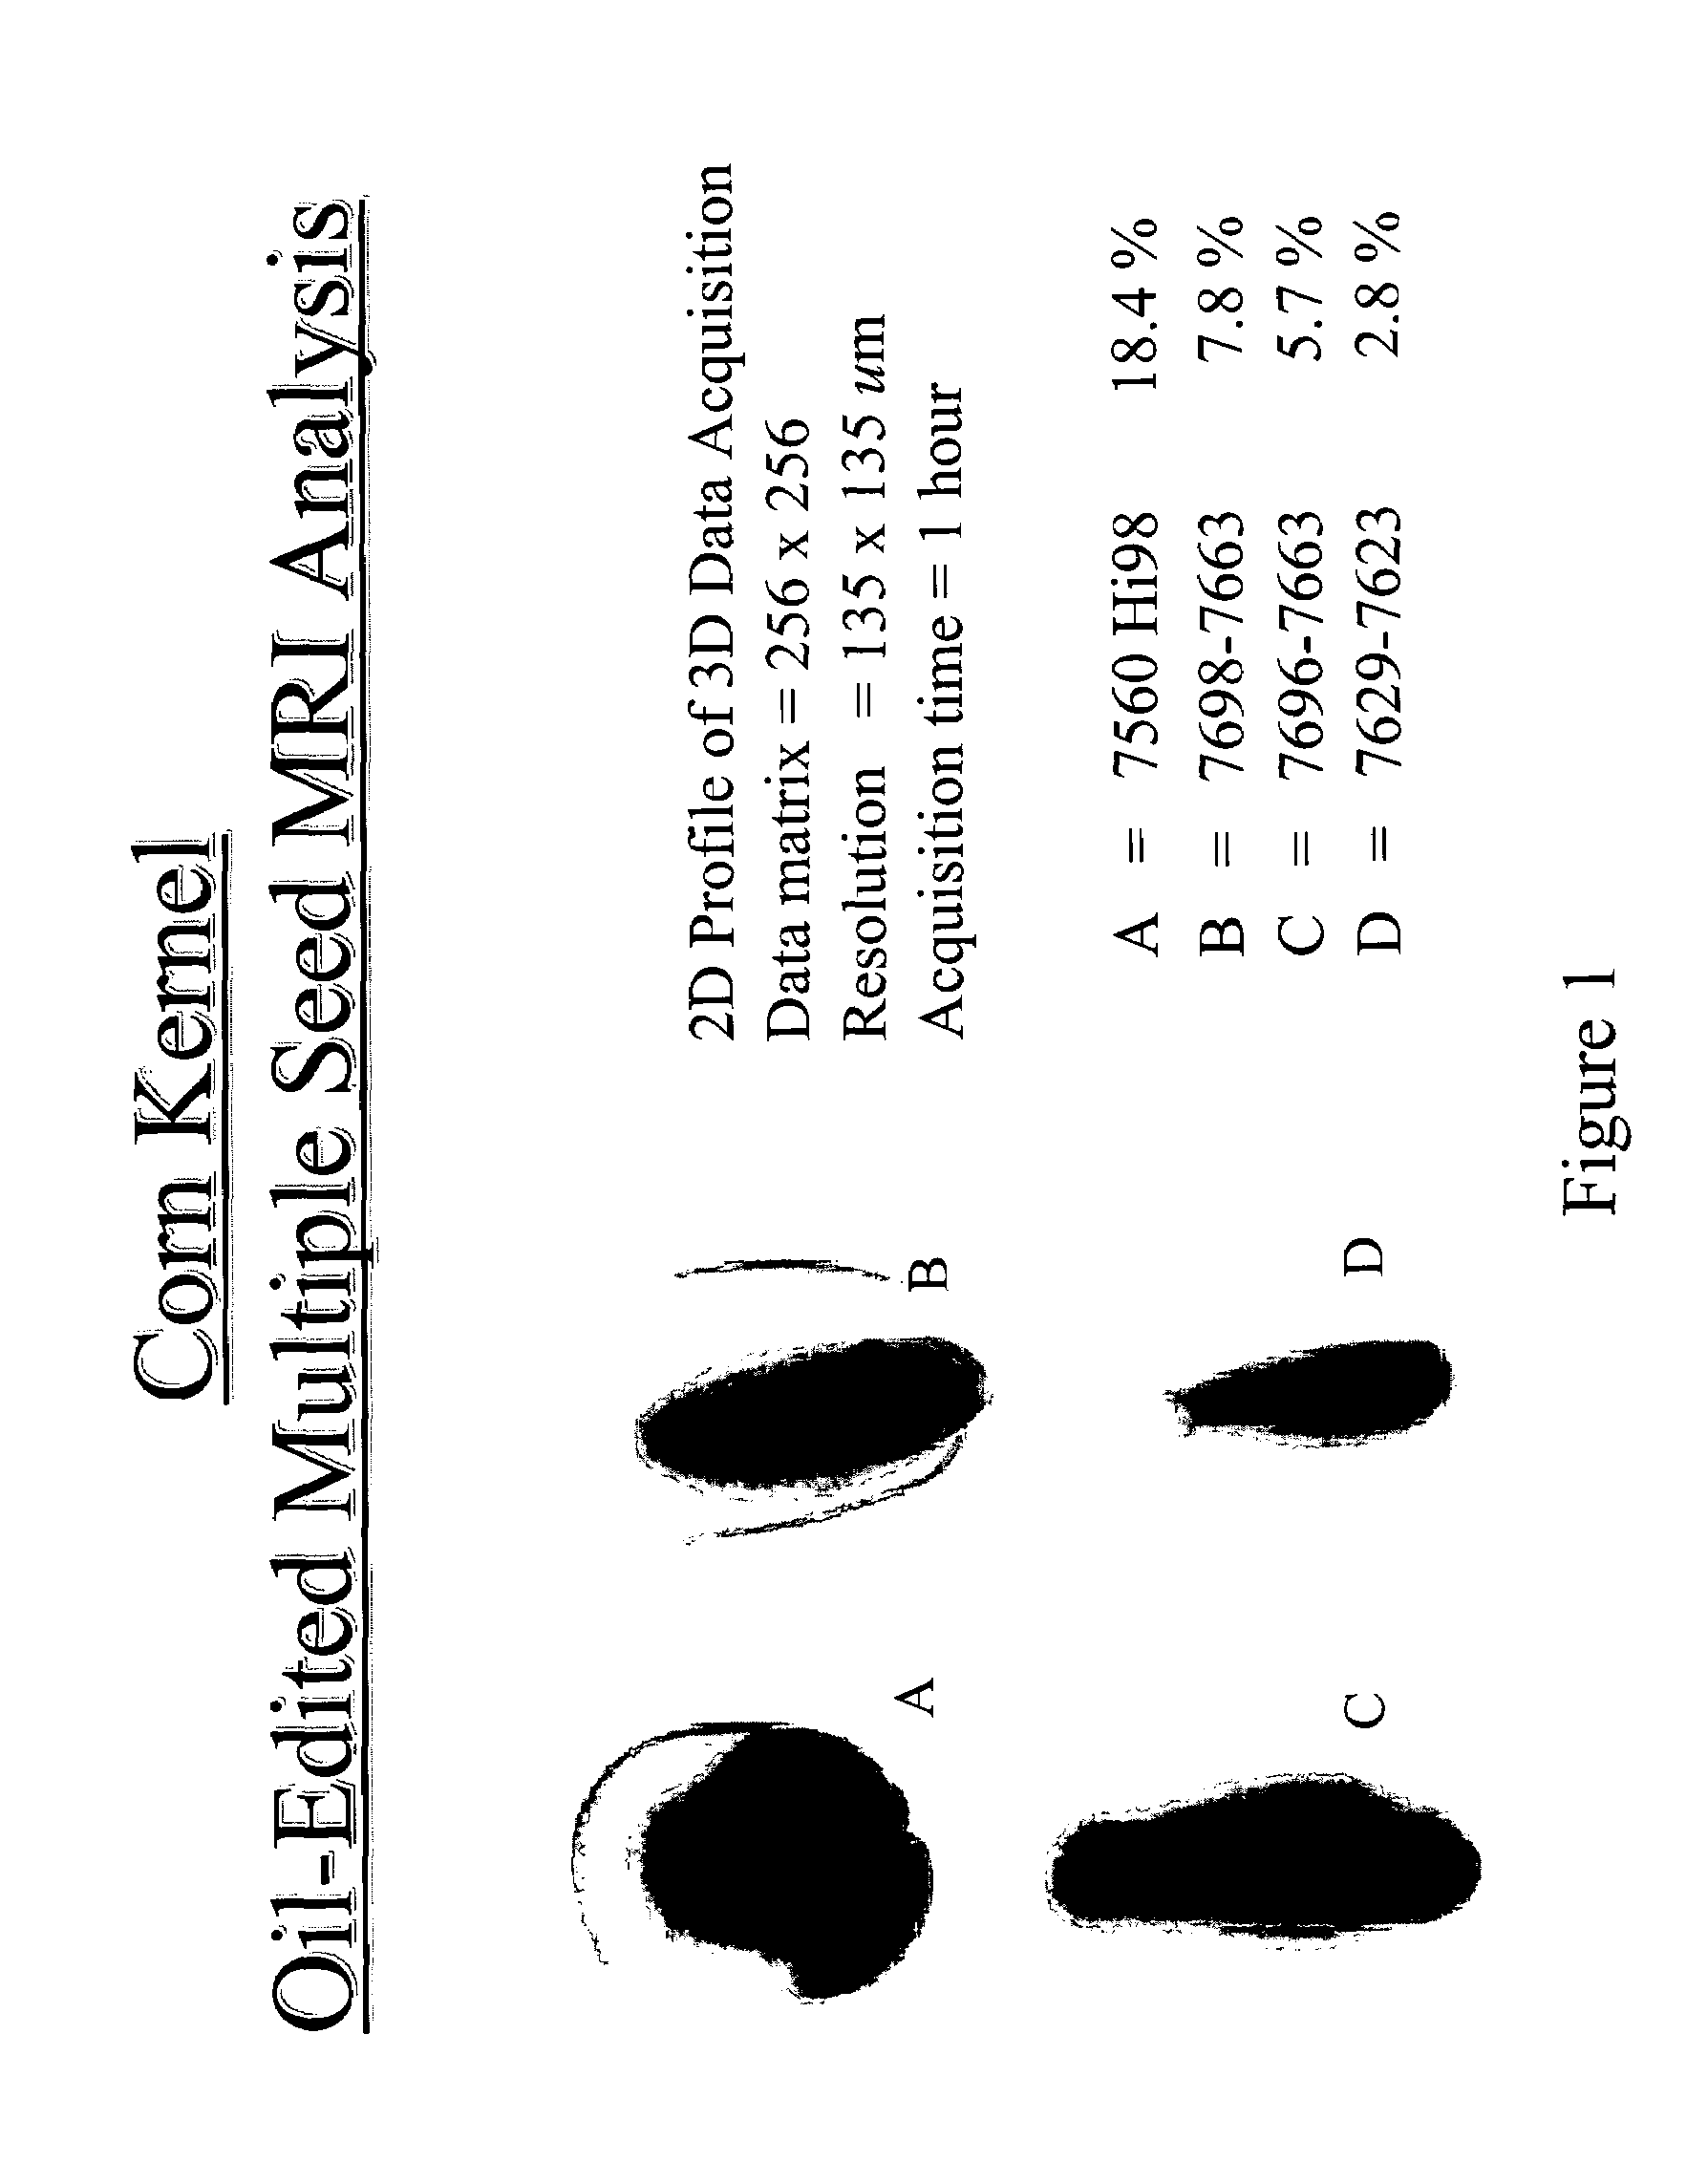 Apparatus and methods for analyzing and improving agricultural products